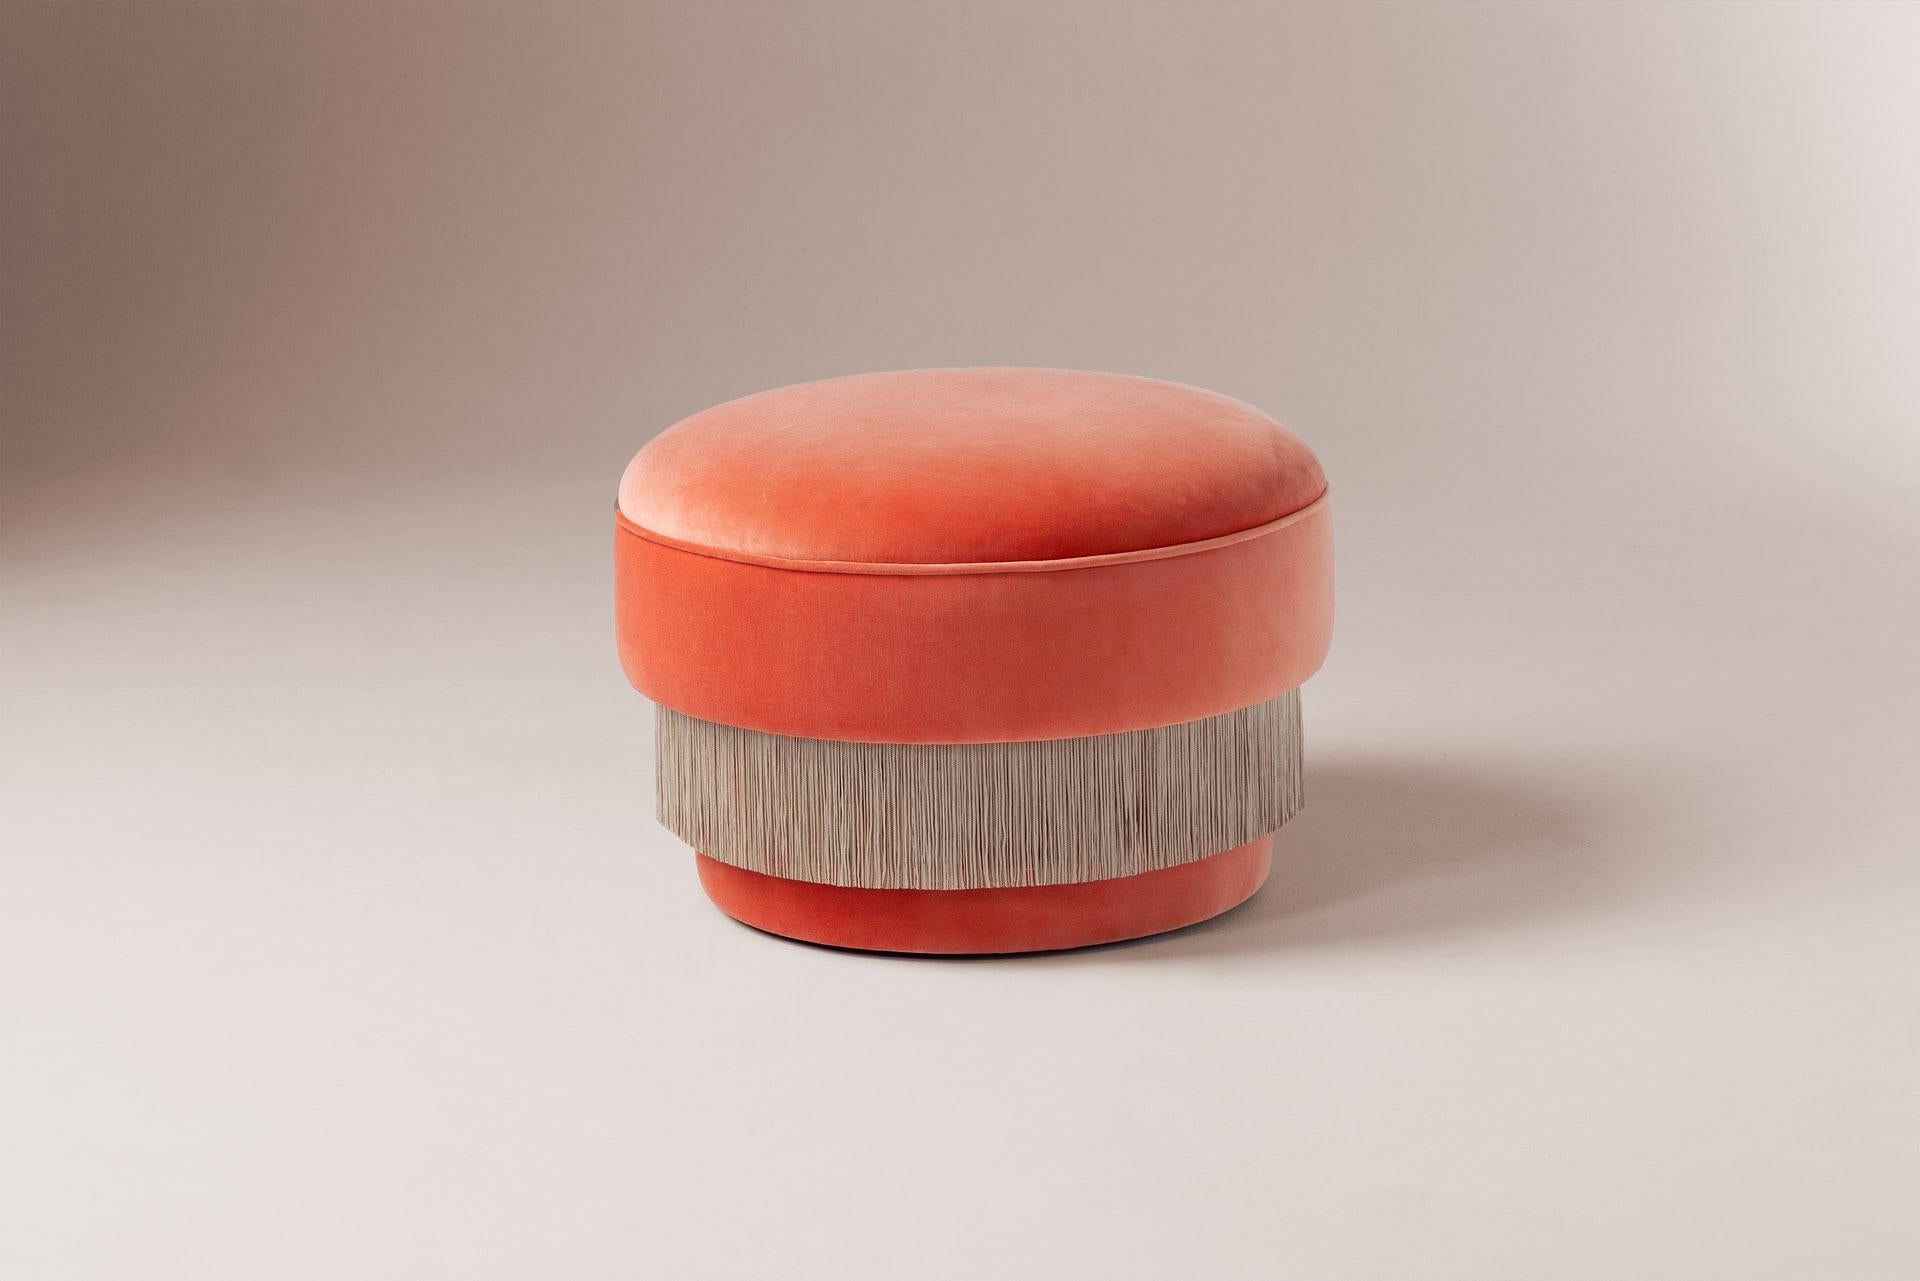 With voluptuous curves and perfect poise, the Mid-Century Modern inspired La Folie Pouf Ottoman exalts passion and fantasy as if you were in a burlesque show at Moulin Rouge. Let yourself be drawn by this flirtatious feeling of sensuality and a